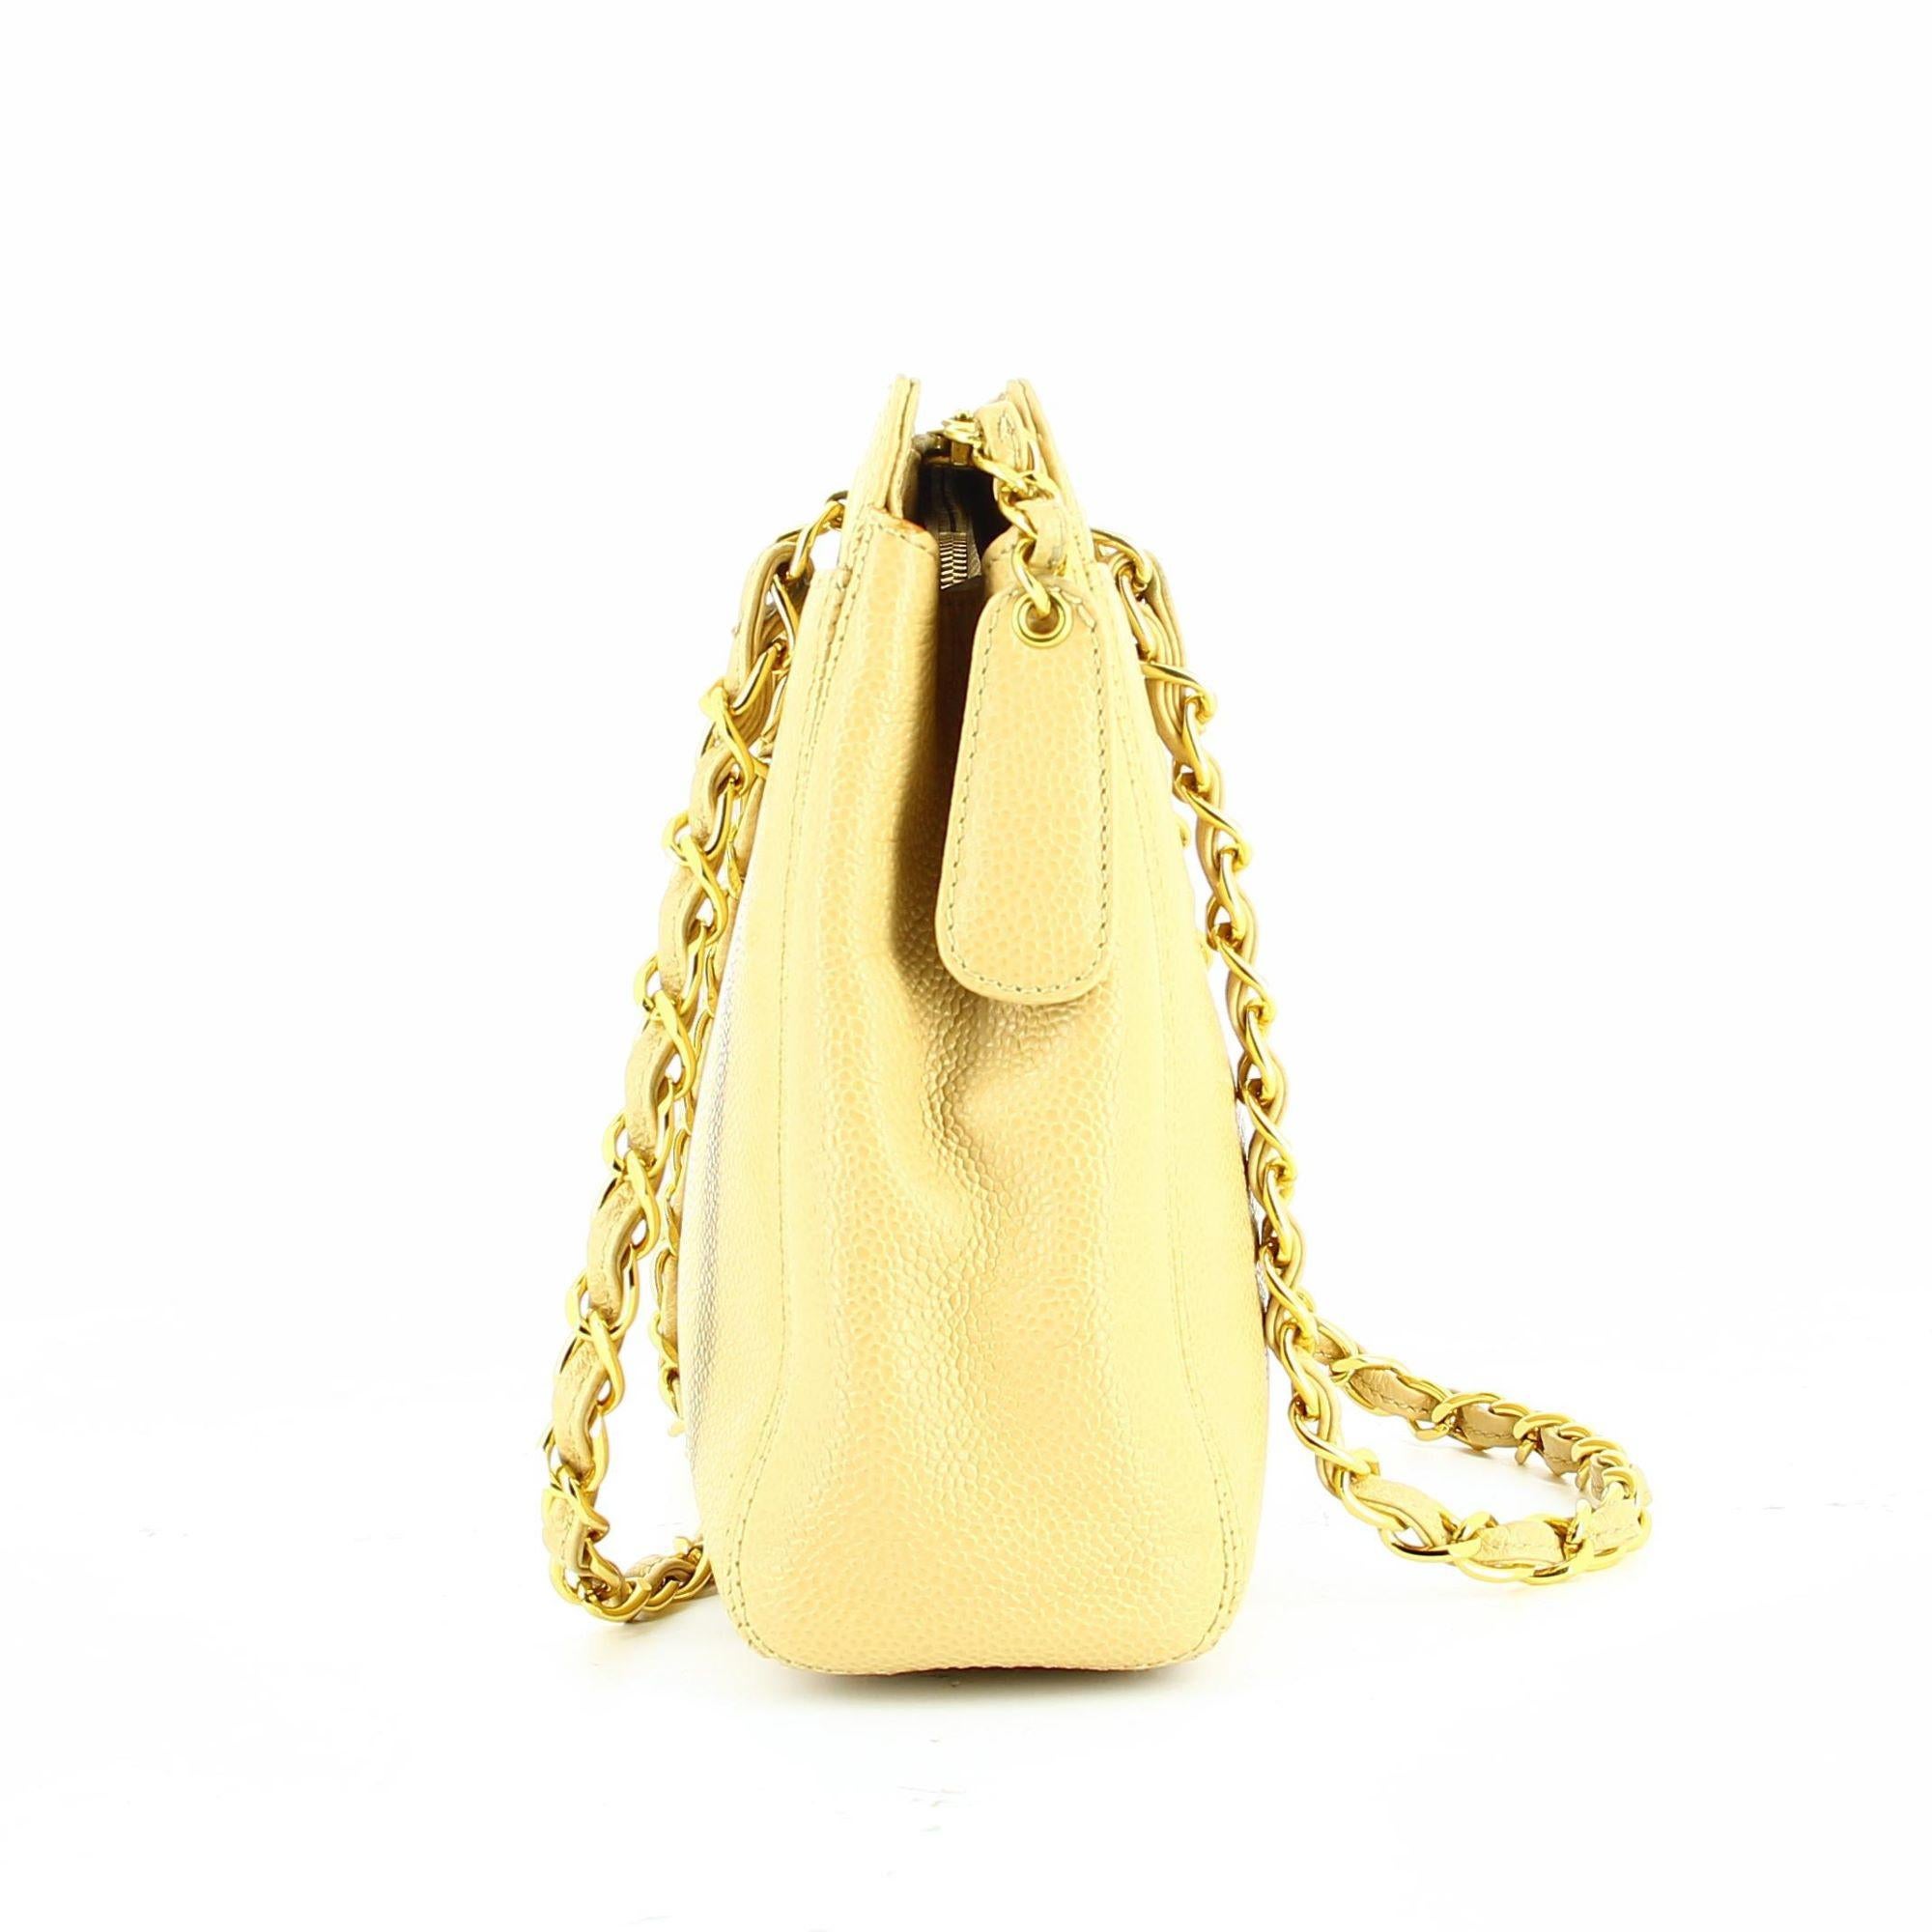 1990s Chanel Yellow Leather Bag 1